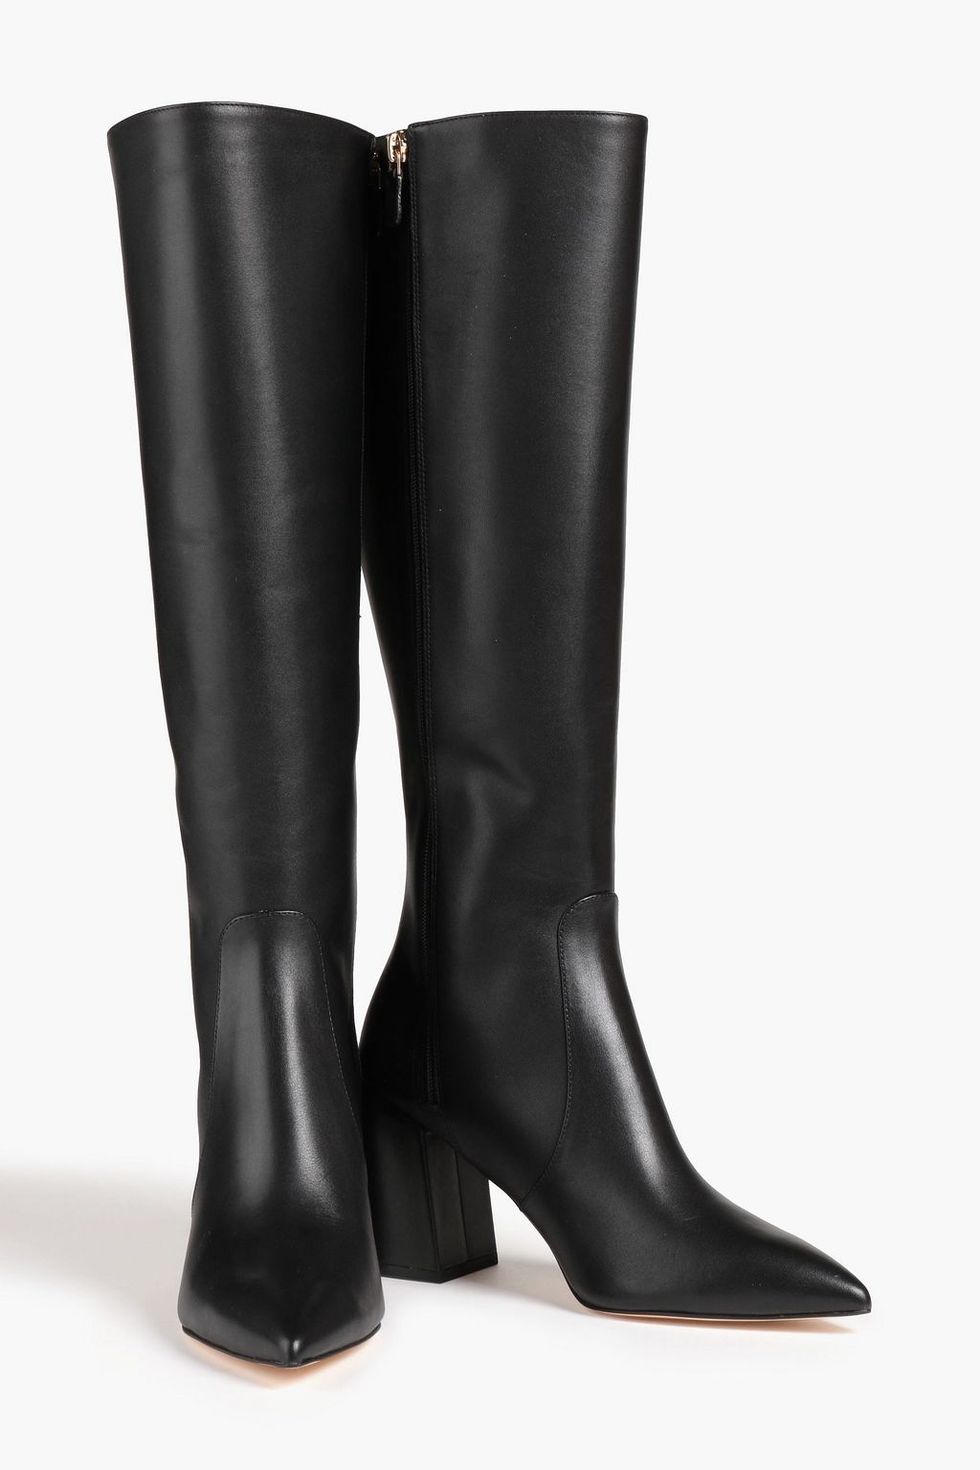 Erica Knee High Leather Boots - Black Leather